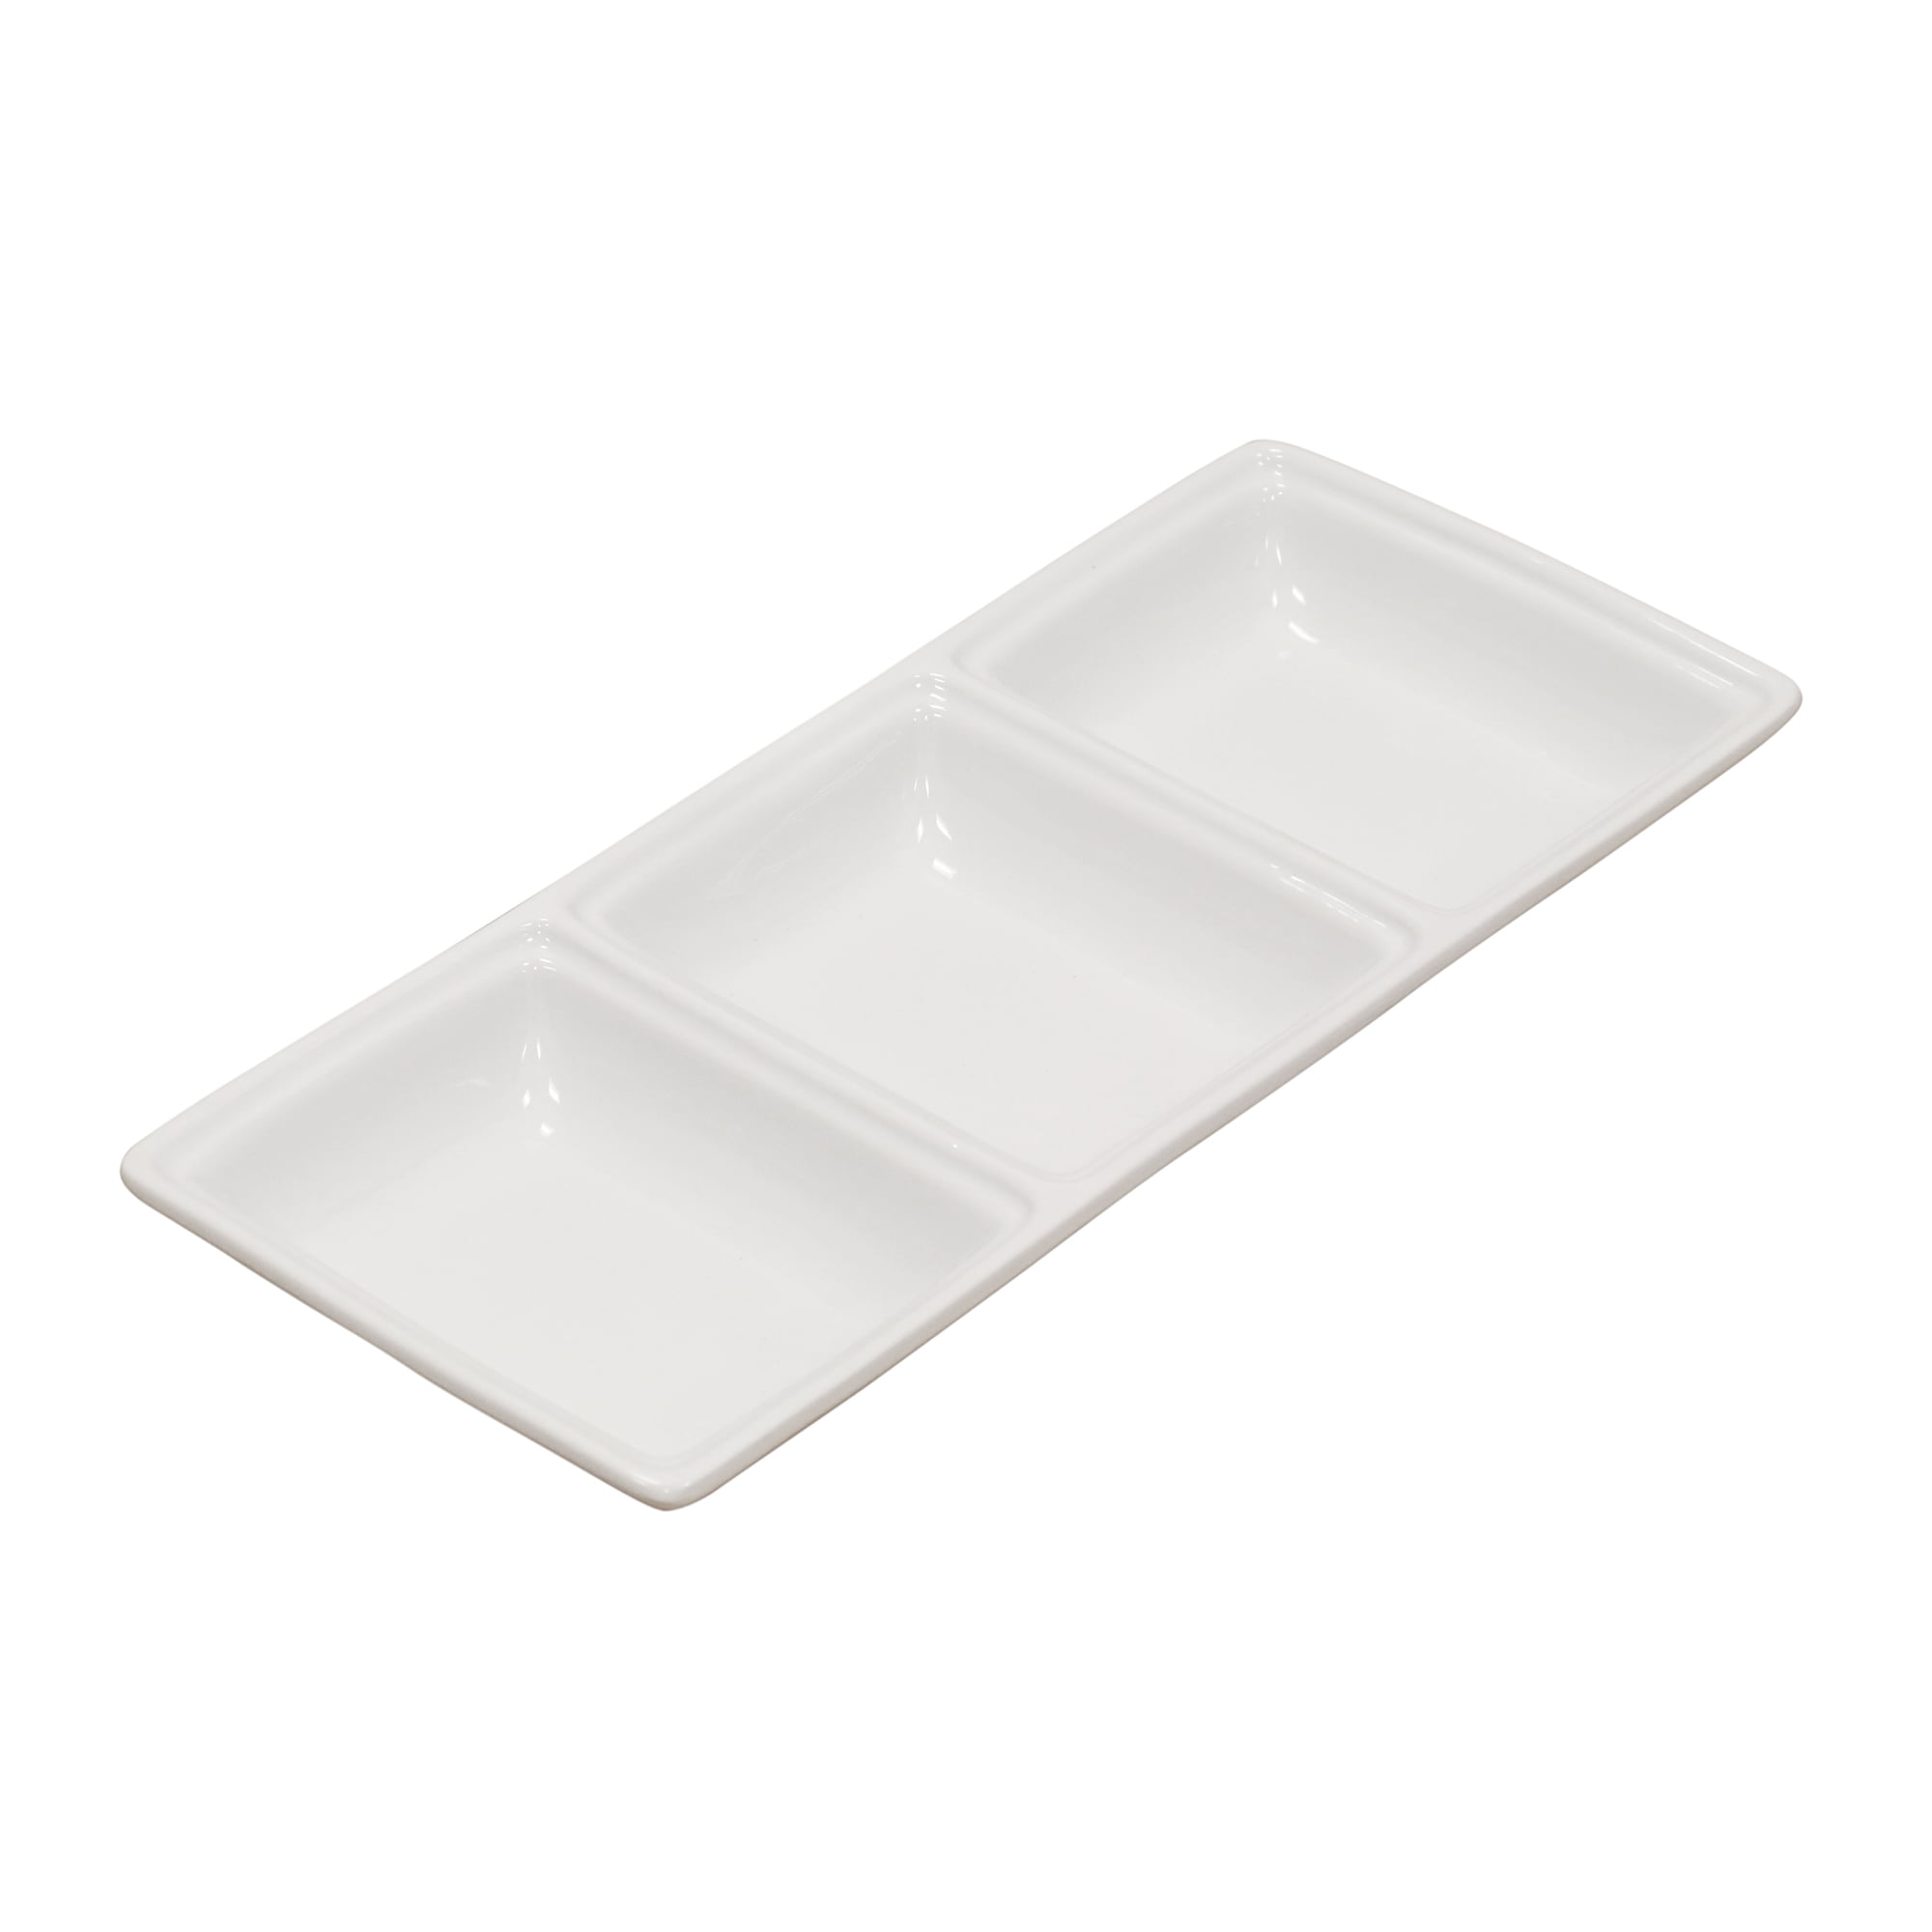 White Better Homes and Gardens BH44-036-199-36 Porcelain Round Chip and Dip Platter